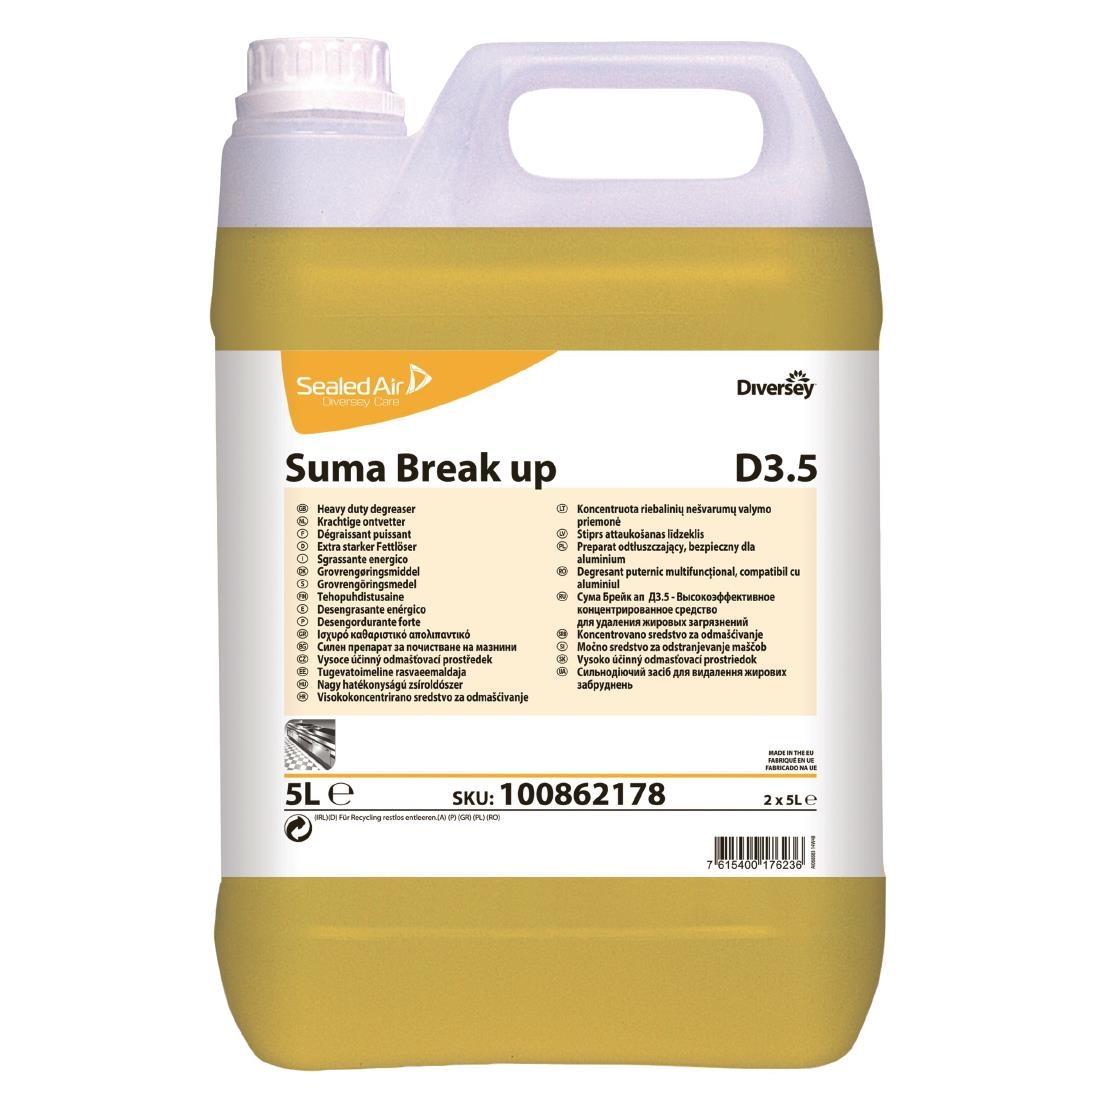 Suma Break Up D3.5 Heavy-Duty Kitchen Degreaser Concentrate 5Ltr (Pack of 2) - CD513  - 1